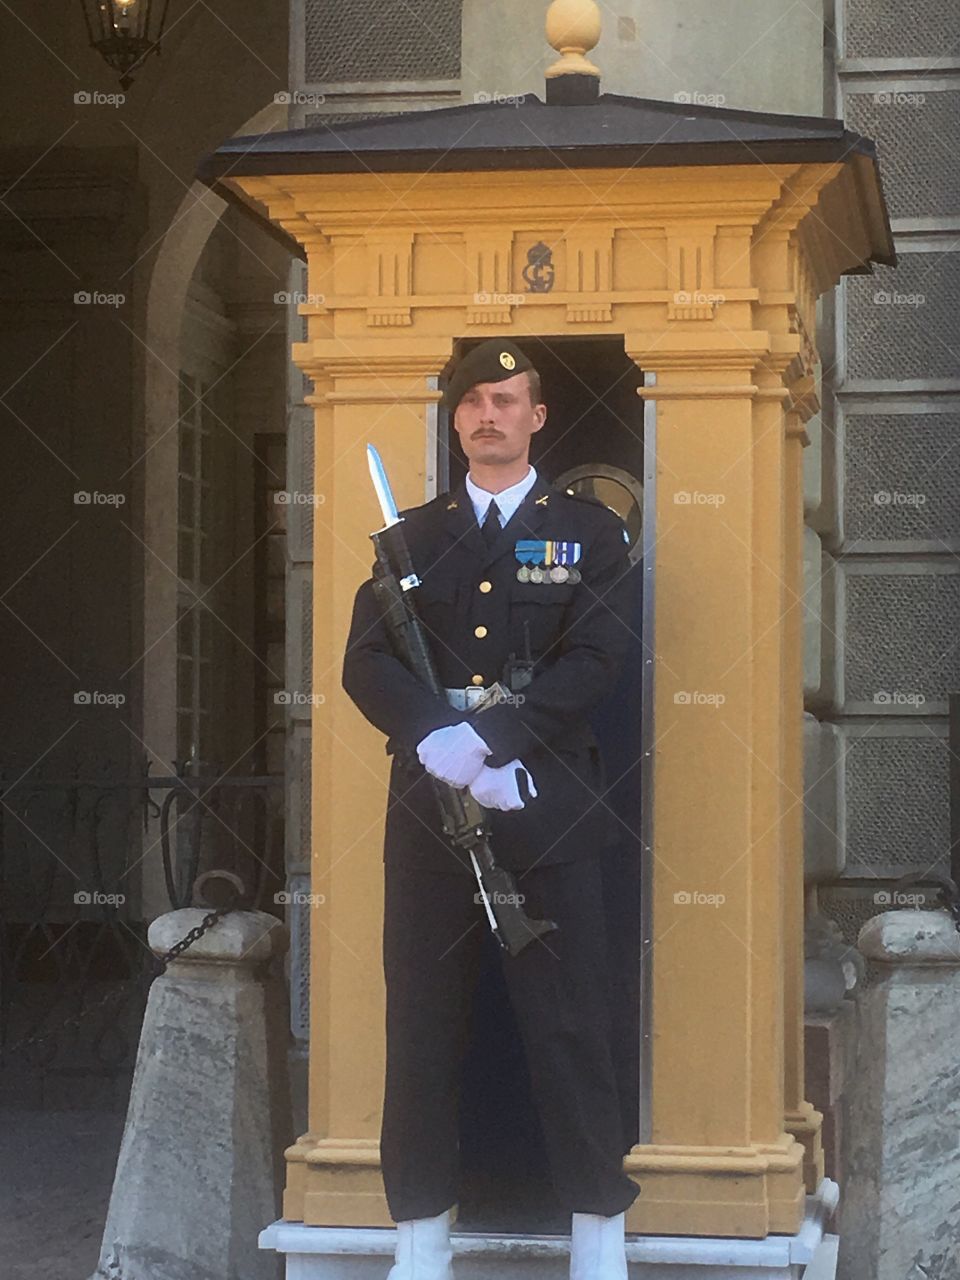 A Swedish castle guard at the castle in Stockholm.